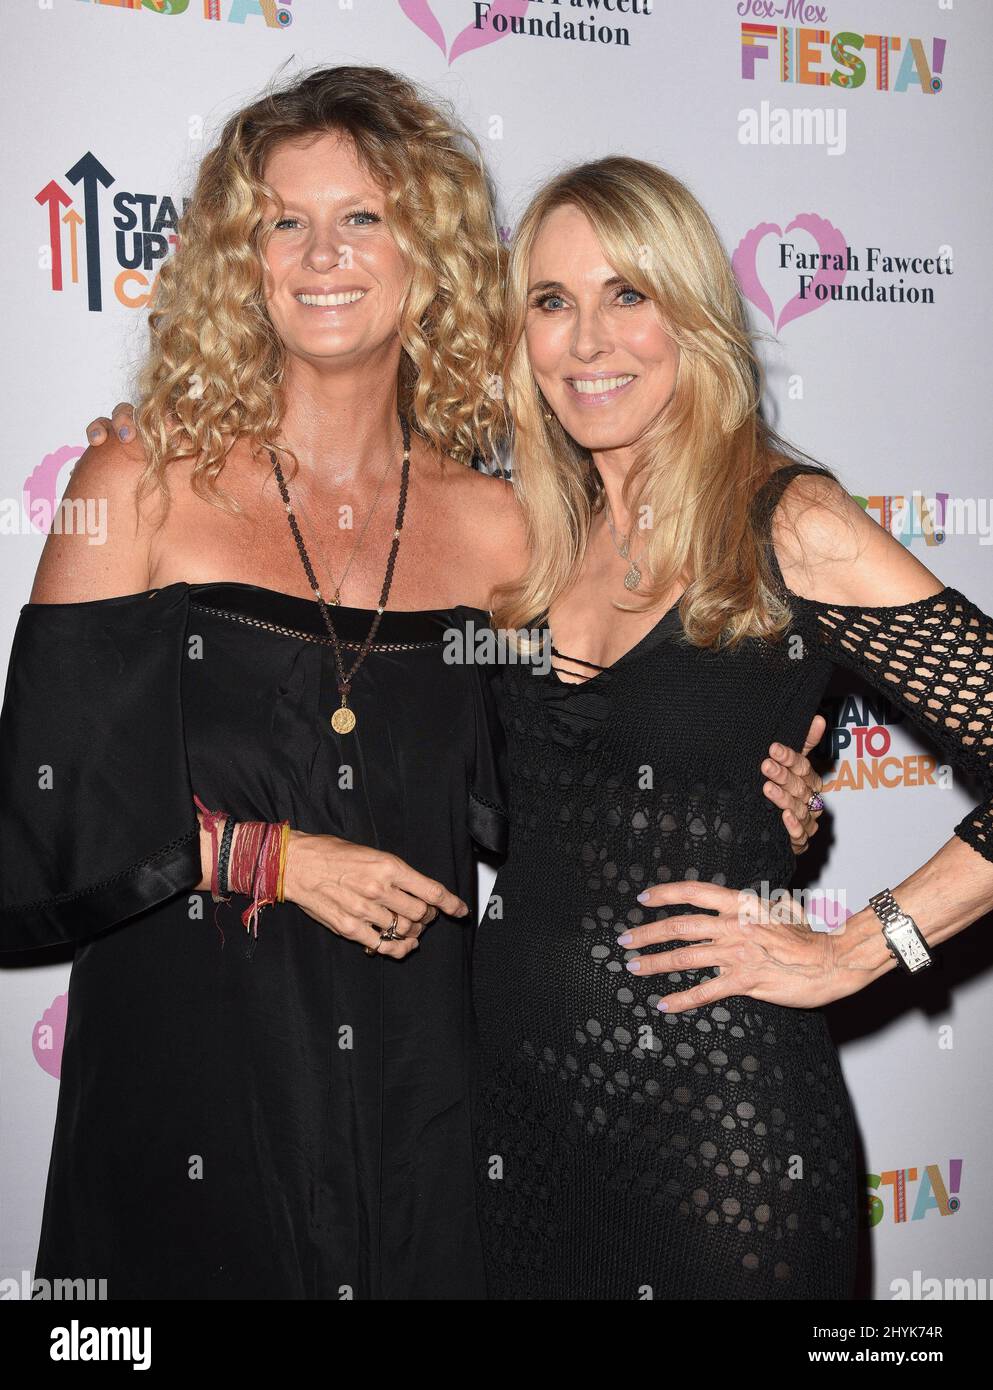 Rachel Hunter and Alana Stewart at The Farrah Fawcett Foundation's Tex-Mex Fiesta held at the Wallis Annenberg Center for the Performing Arts on September 6, 2019 in Beverly Hills, USA. Stock Photo